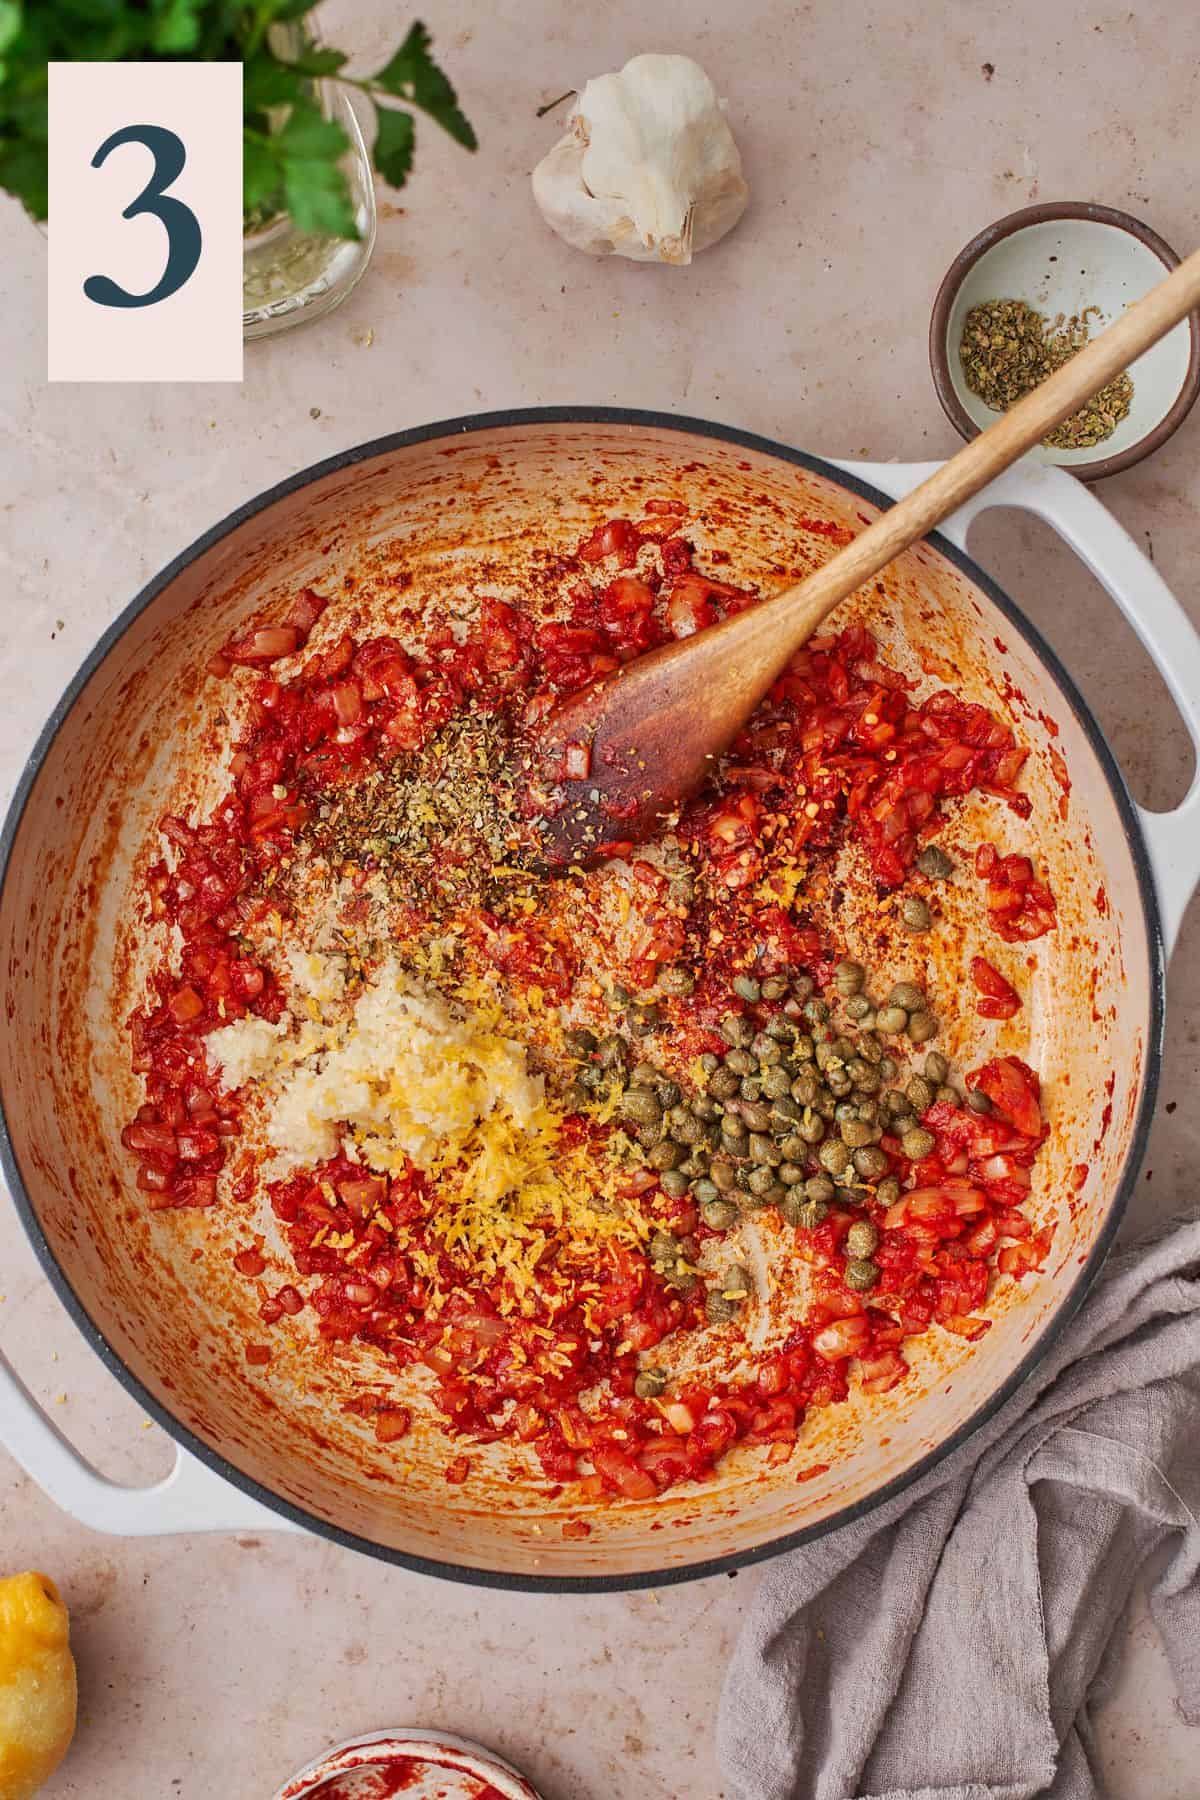 deepened color of tomato paste, along with garlic, dried herbs, lemon zest, red pepper flakes, and capers in a skillet.